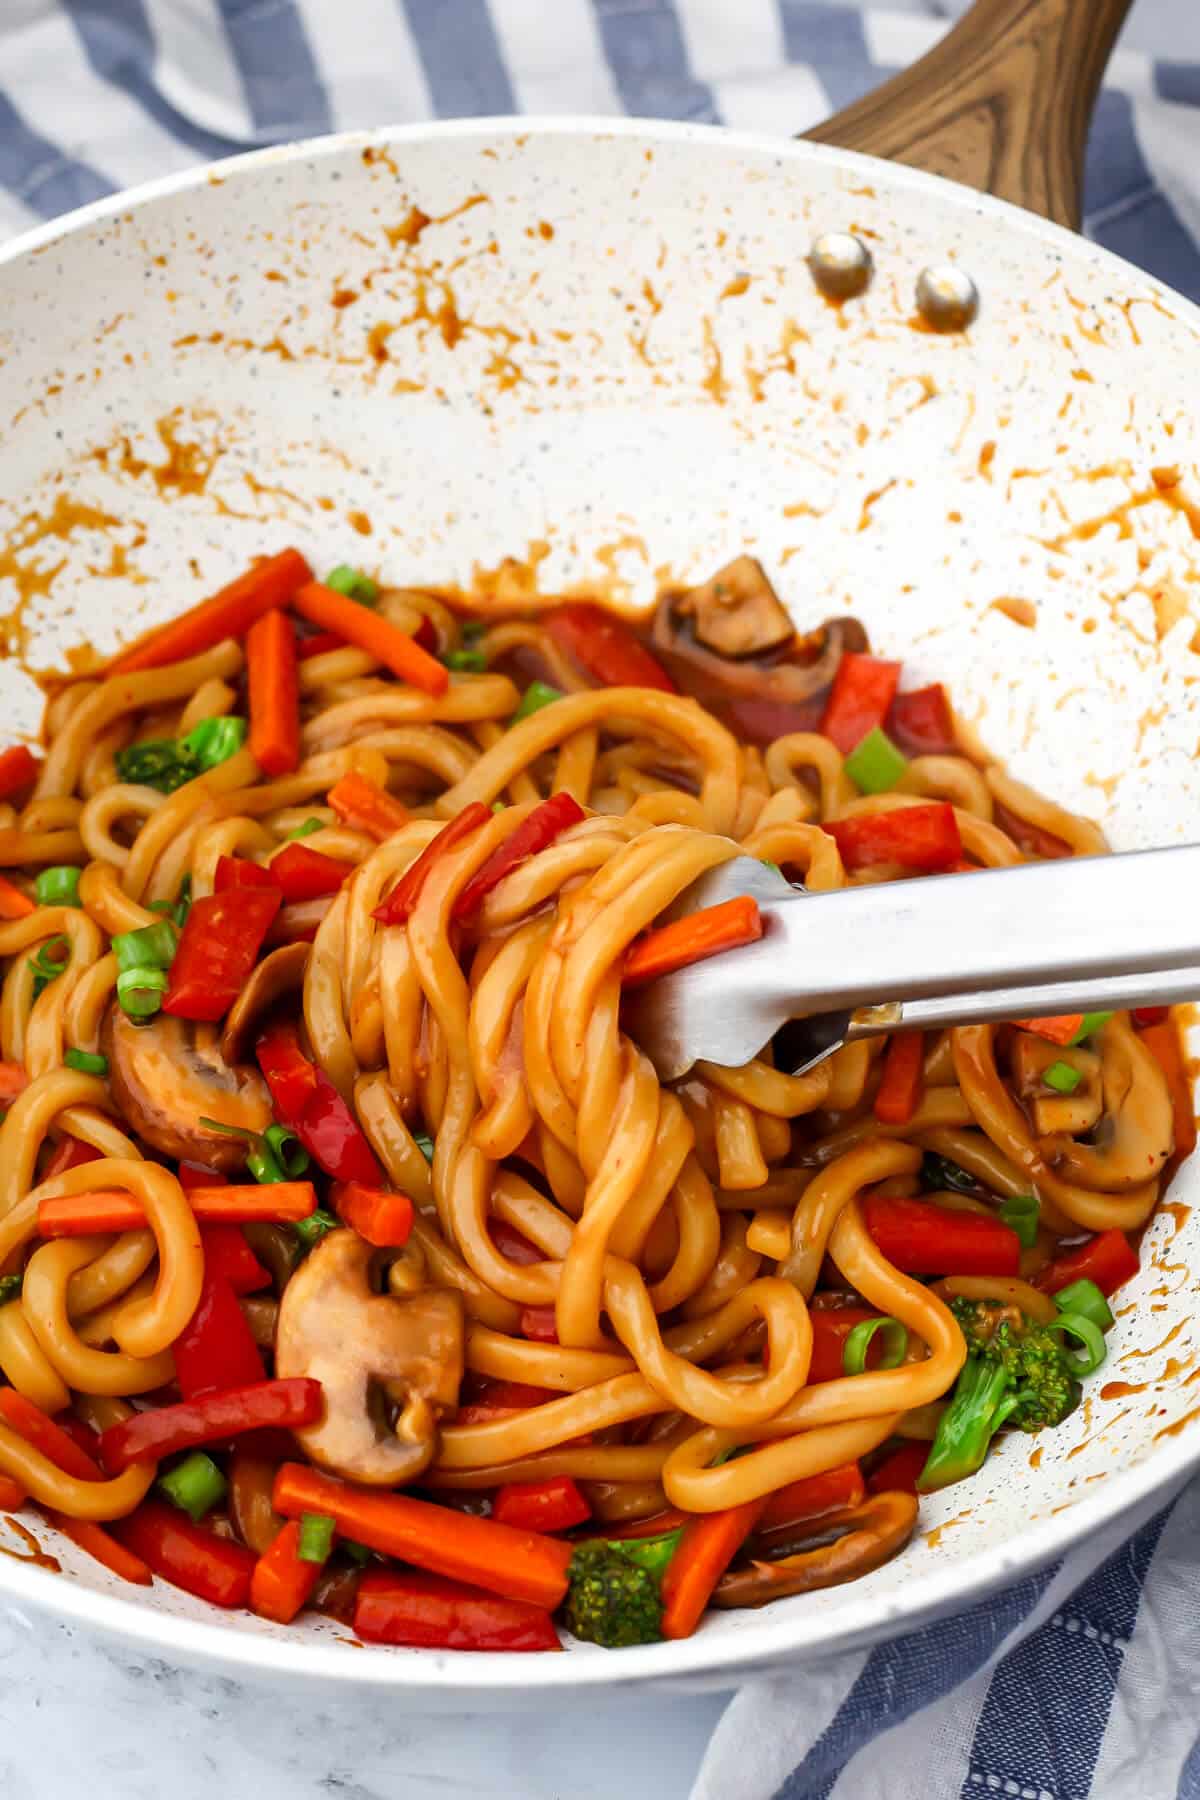 Vegan yaki udon noodles mixed with sauteed vegetables and stir-fry sauce in a white wok.